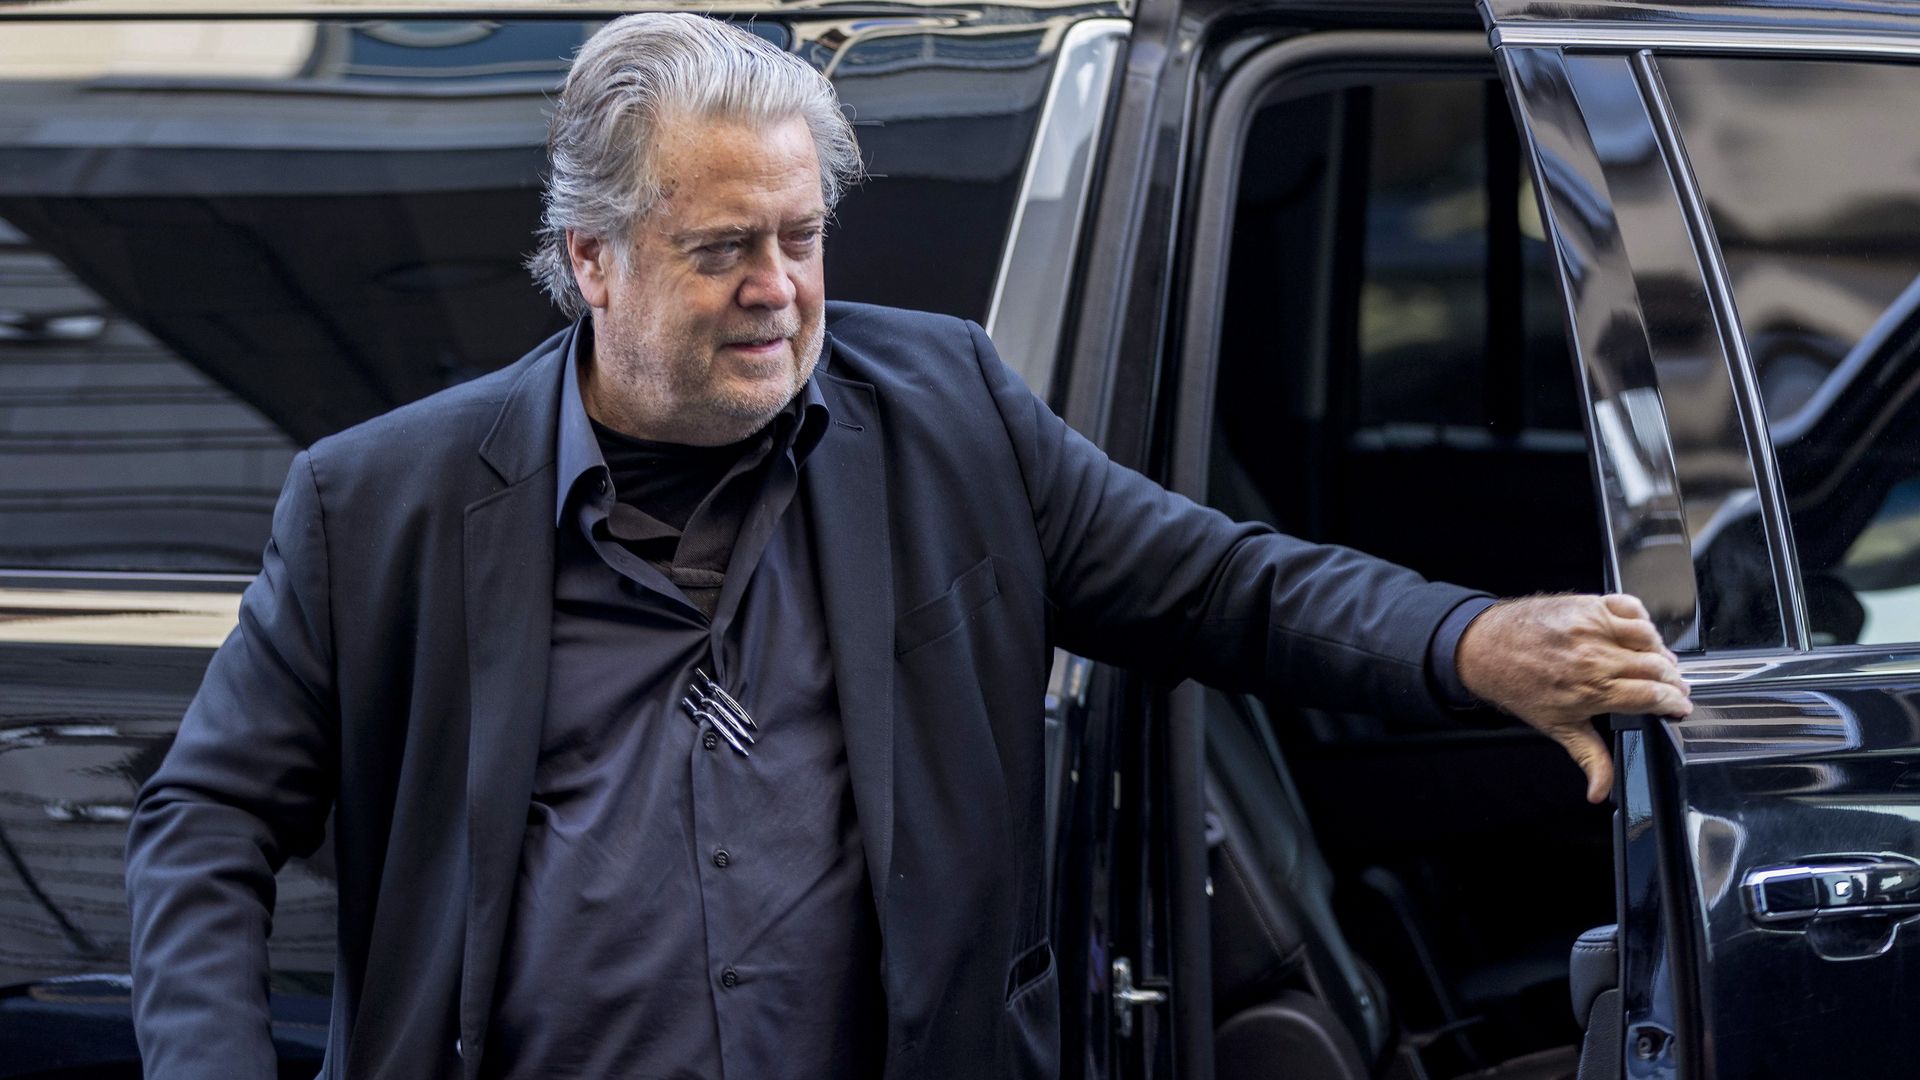  Former White House senior strategist Steve Bannon arrives at the Federal District Court House for the fifth day of his contempt of Congress trial on July 22, 2022.